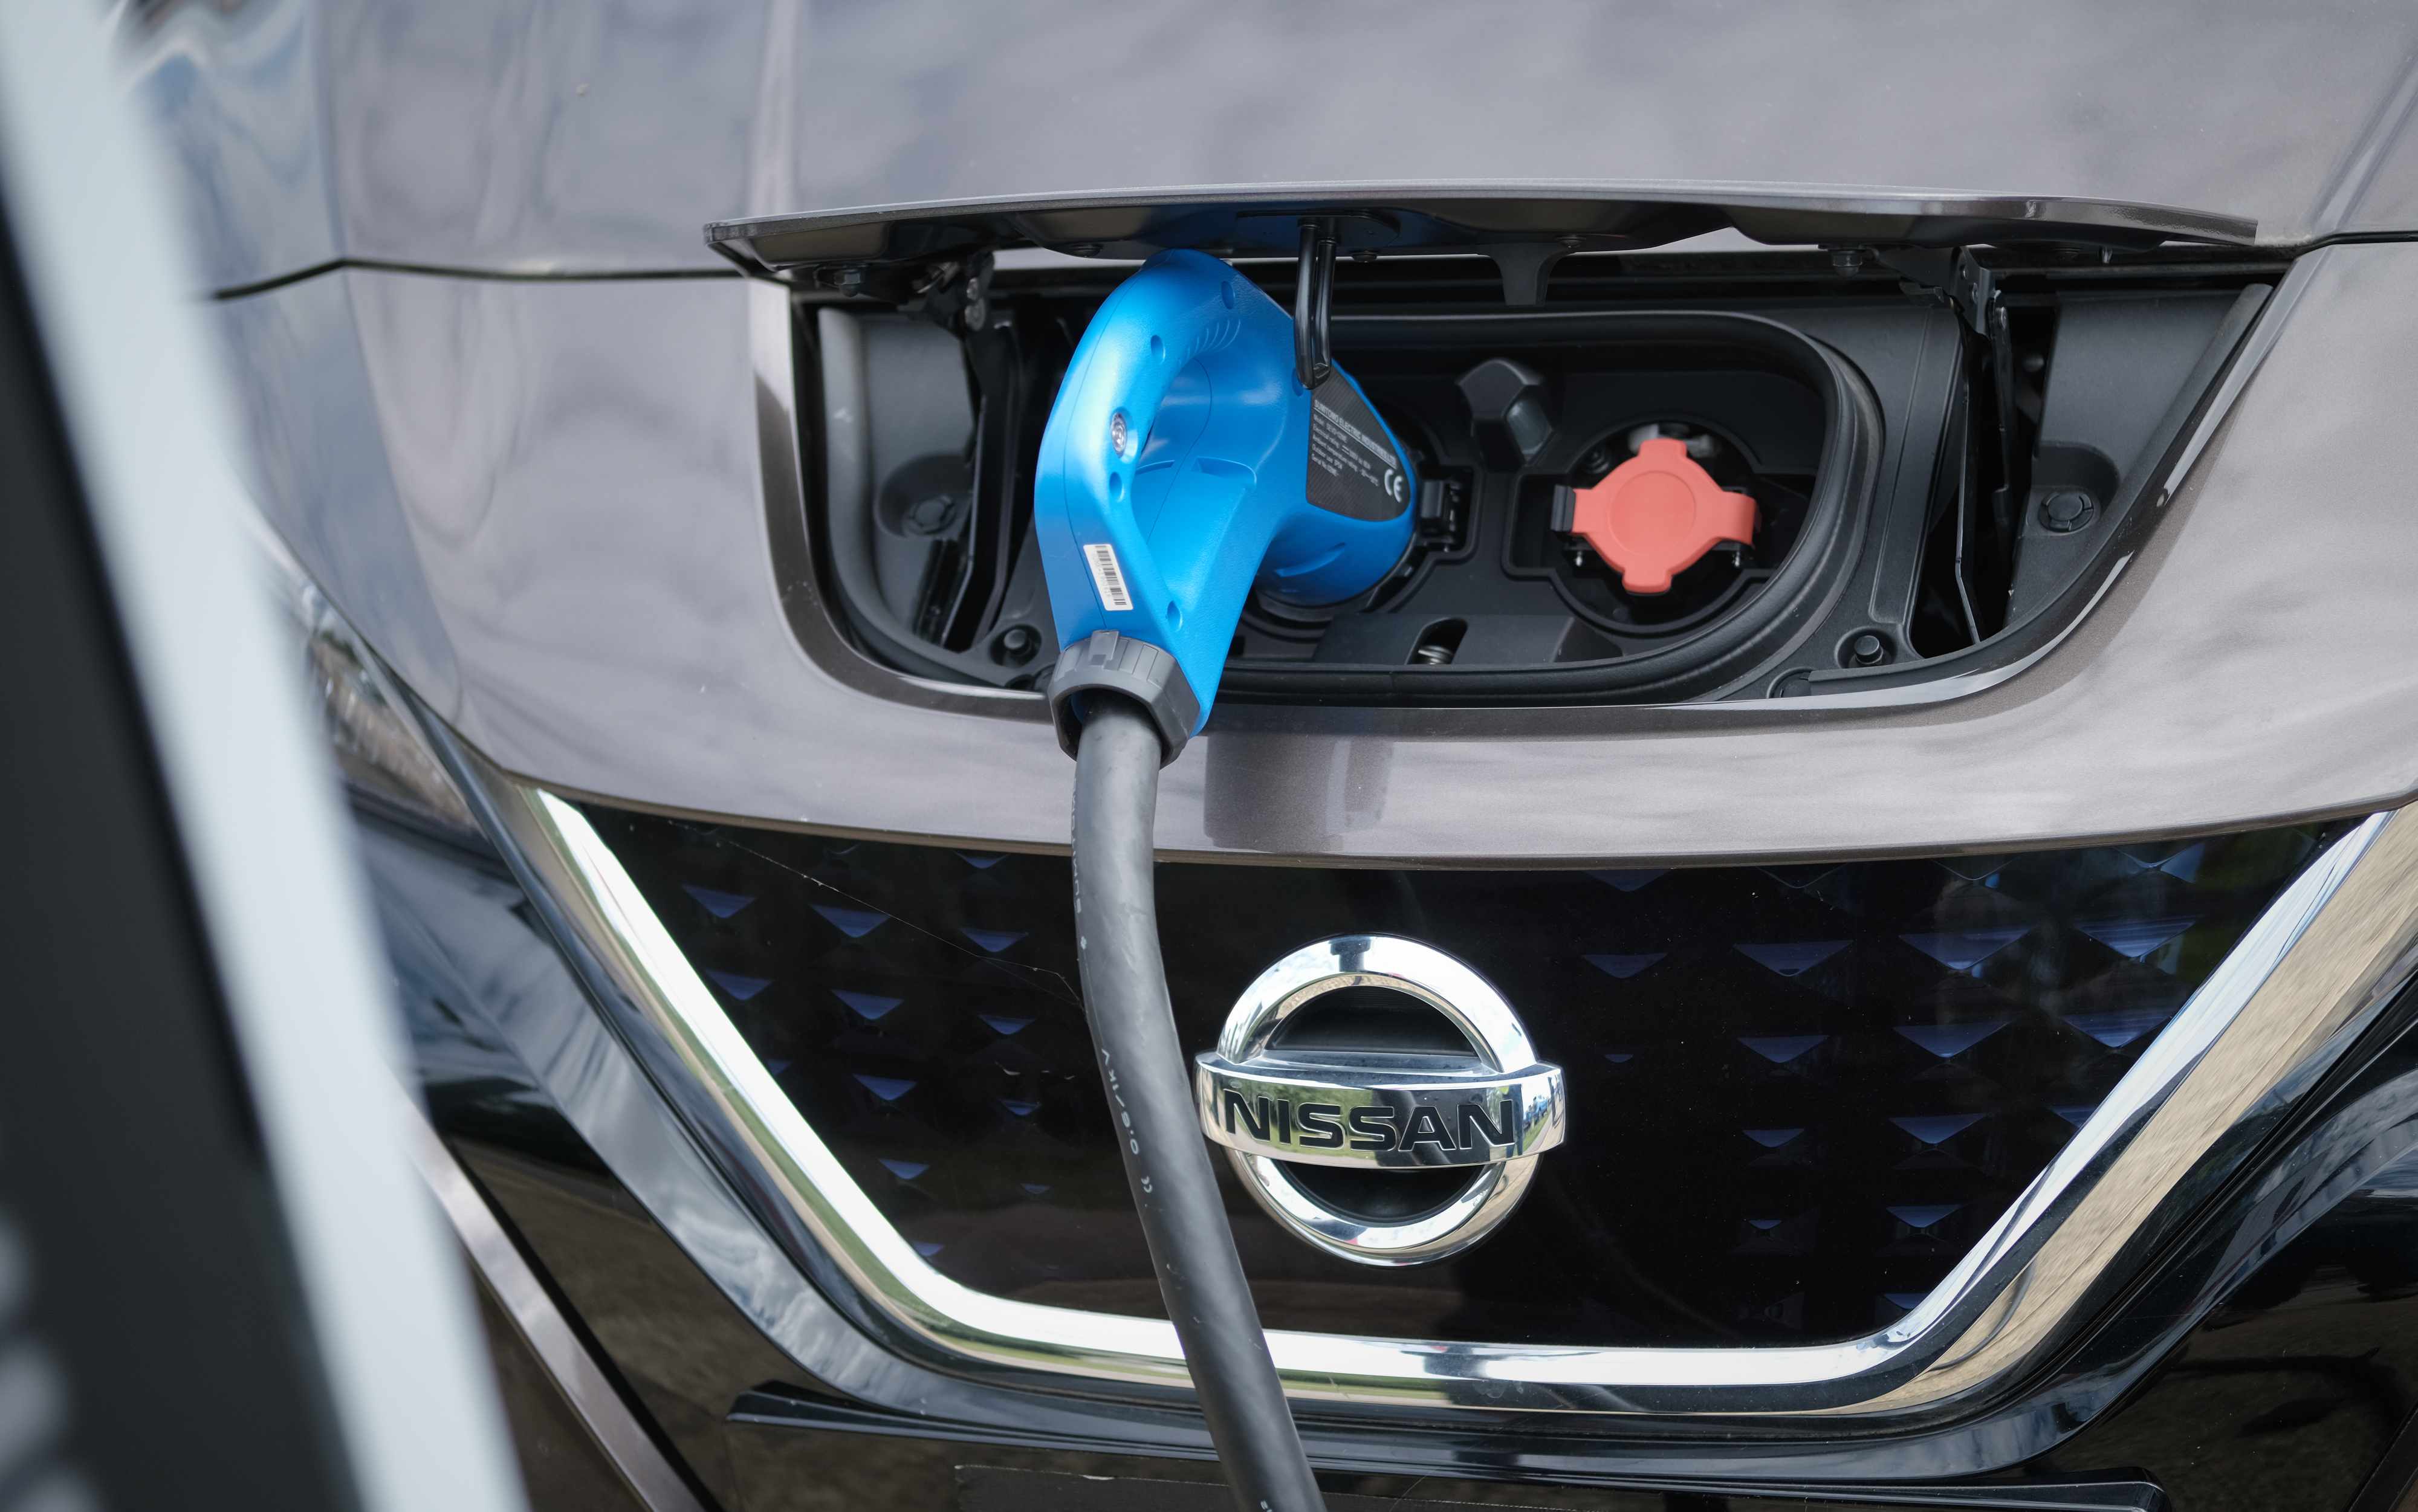 Nissan, E.ON Drive and Imperial College highlight the carbon saving and economic benefits of Vehicle-to-Grid technology